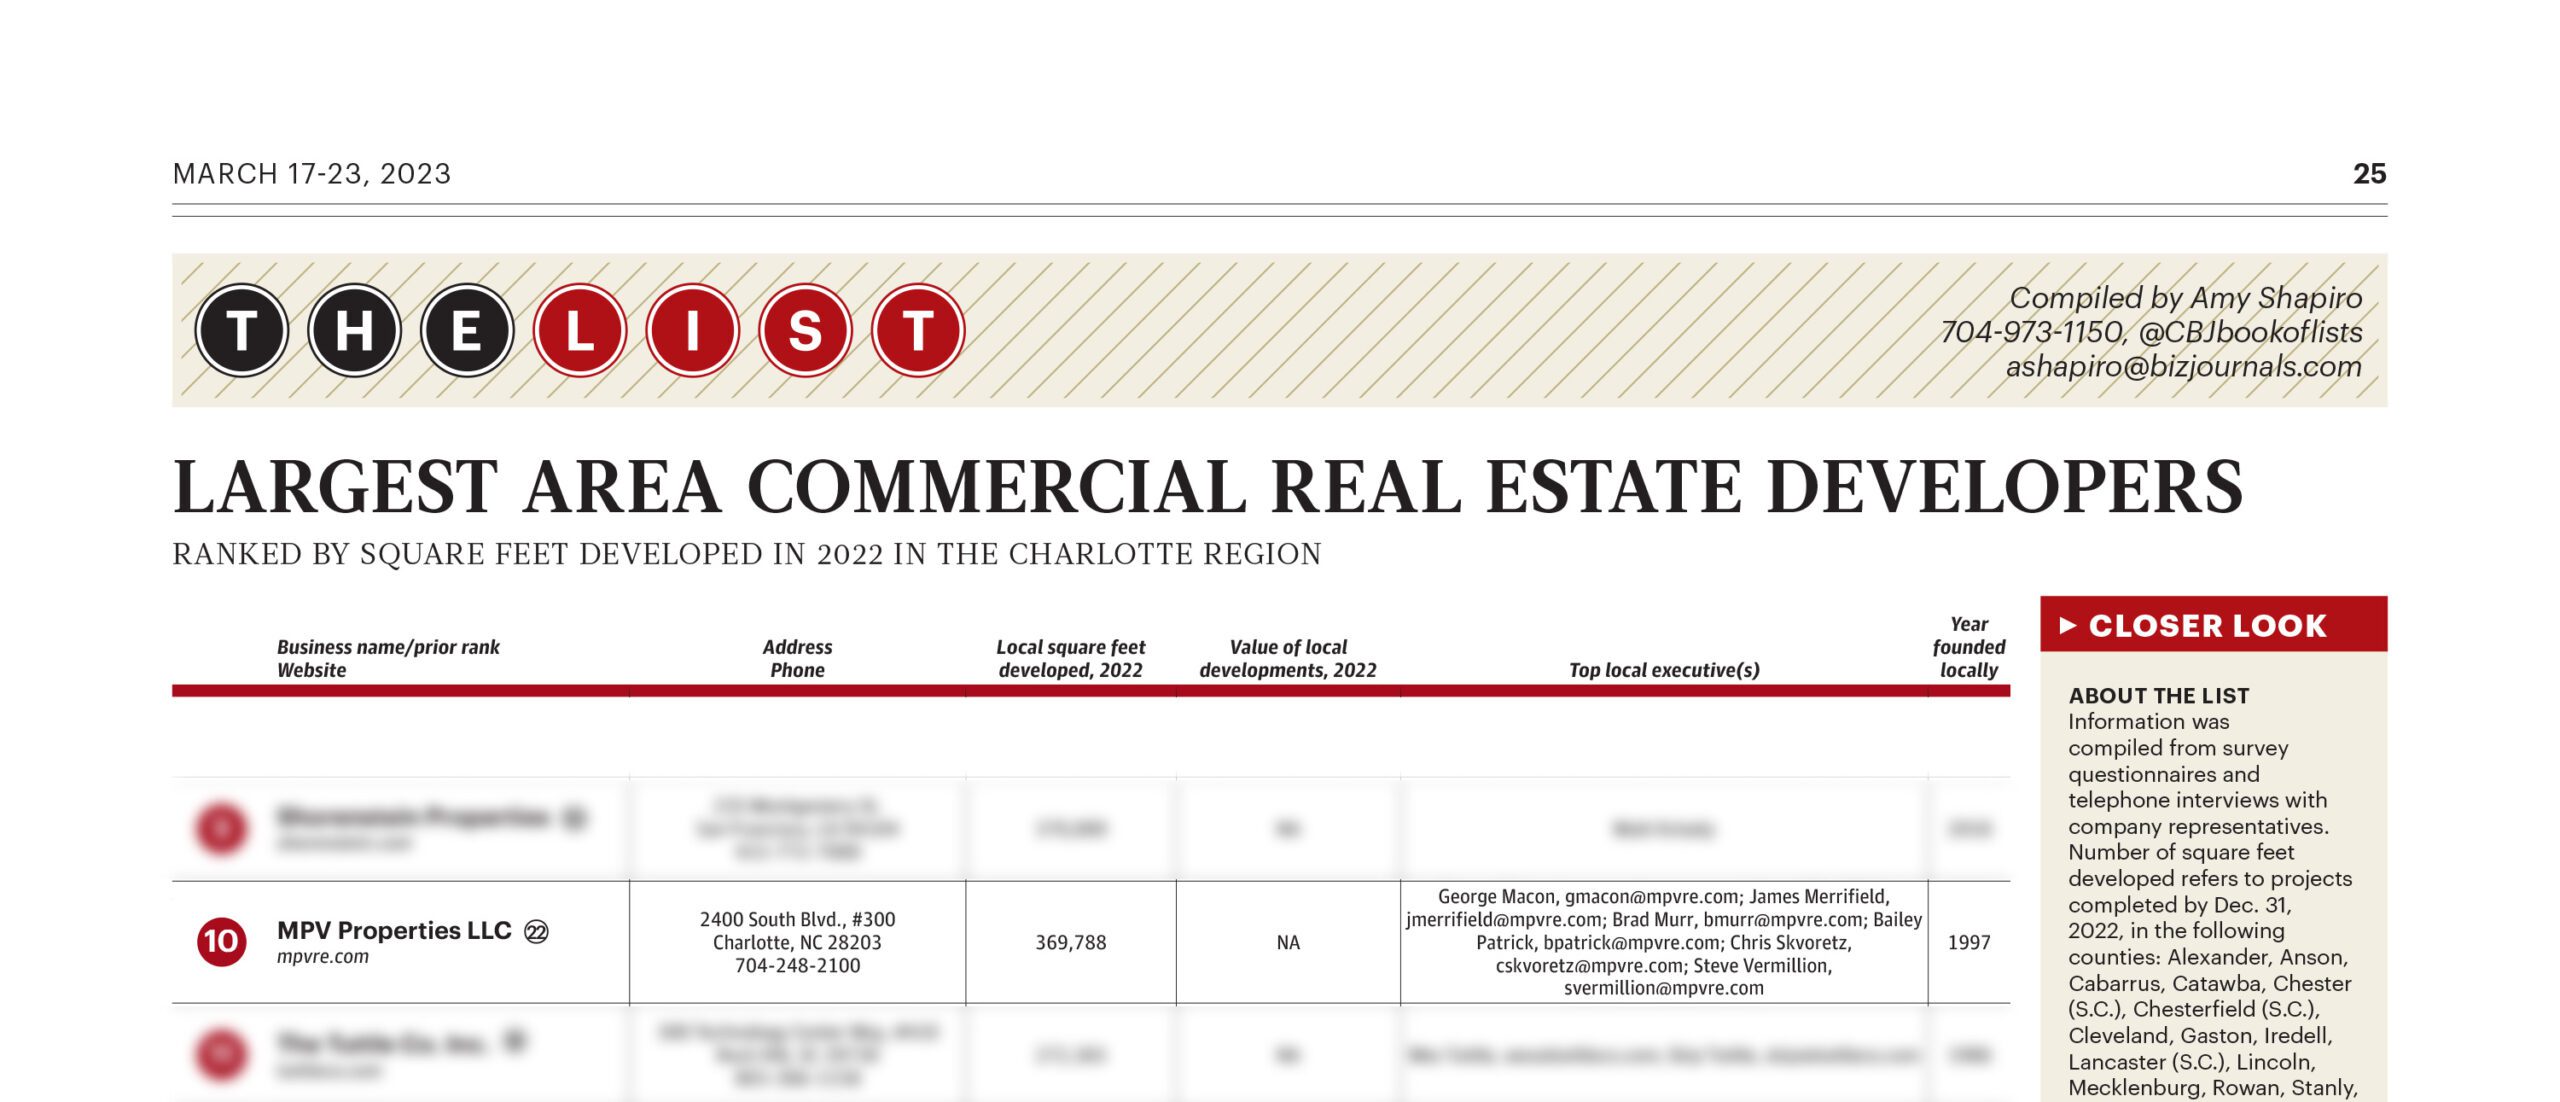 Charlotte Business Journal's List of Largest CRE Developers in the region with MPV at #10 for 1-year activity